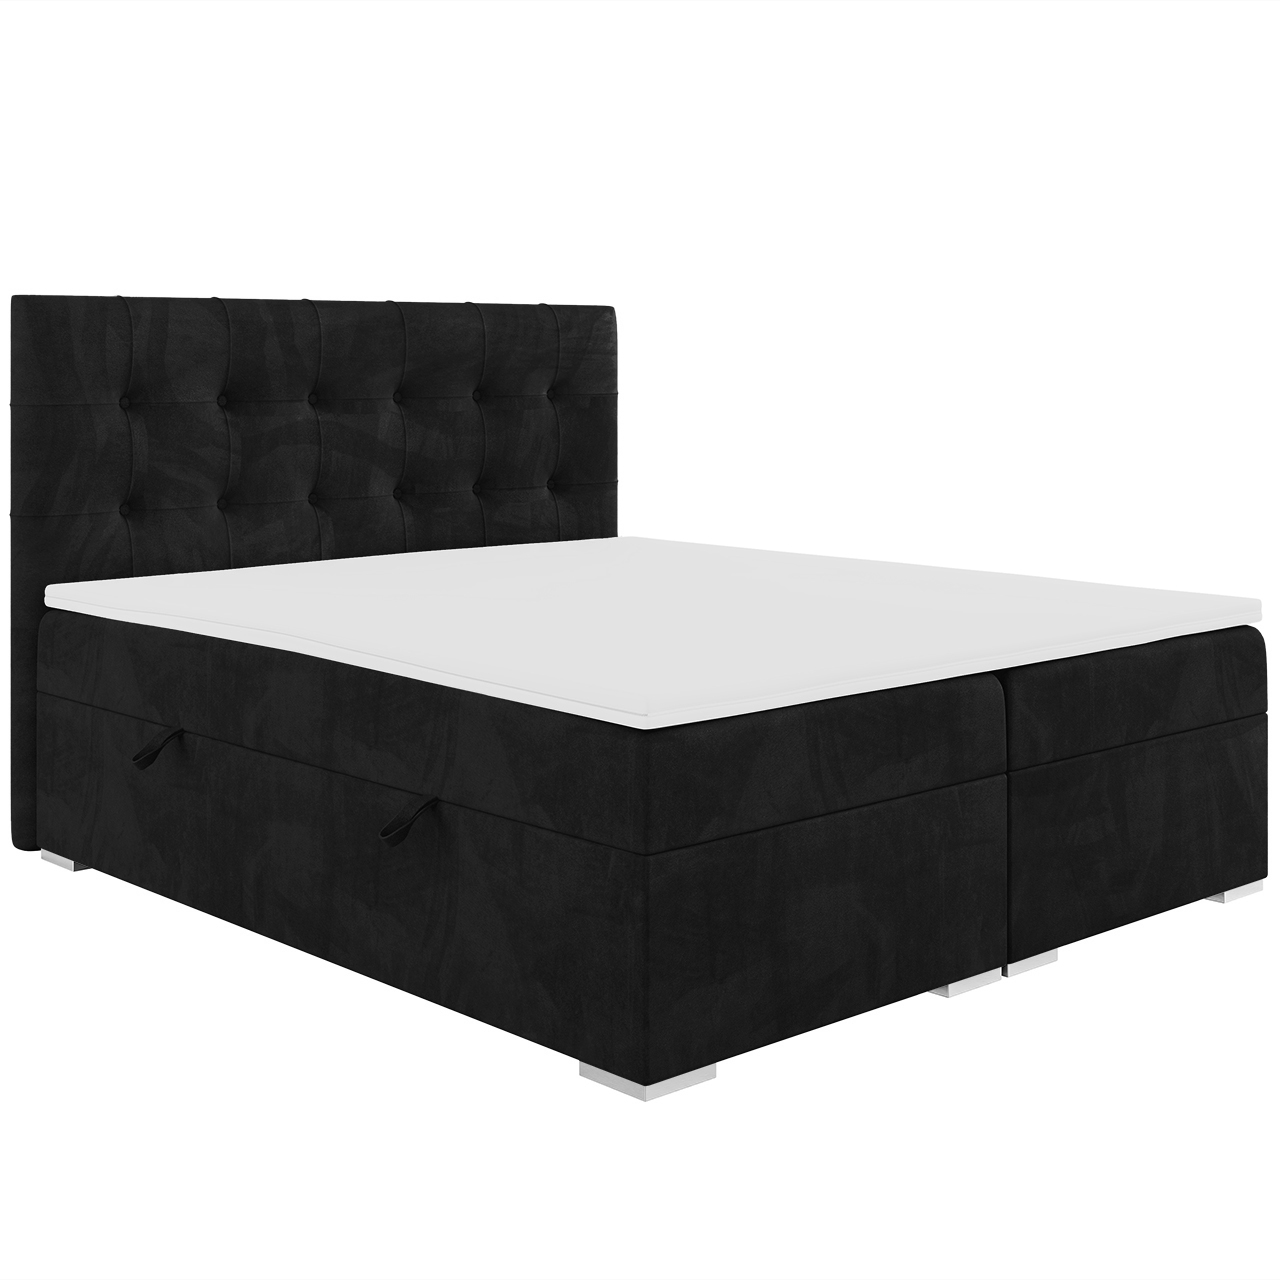 Upholstered bed CARLO 120x200 riviera 100